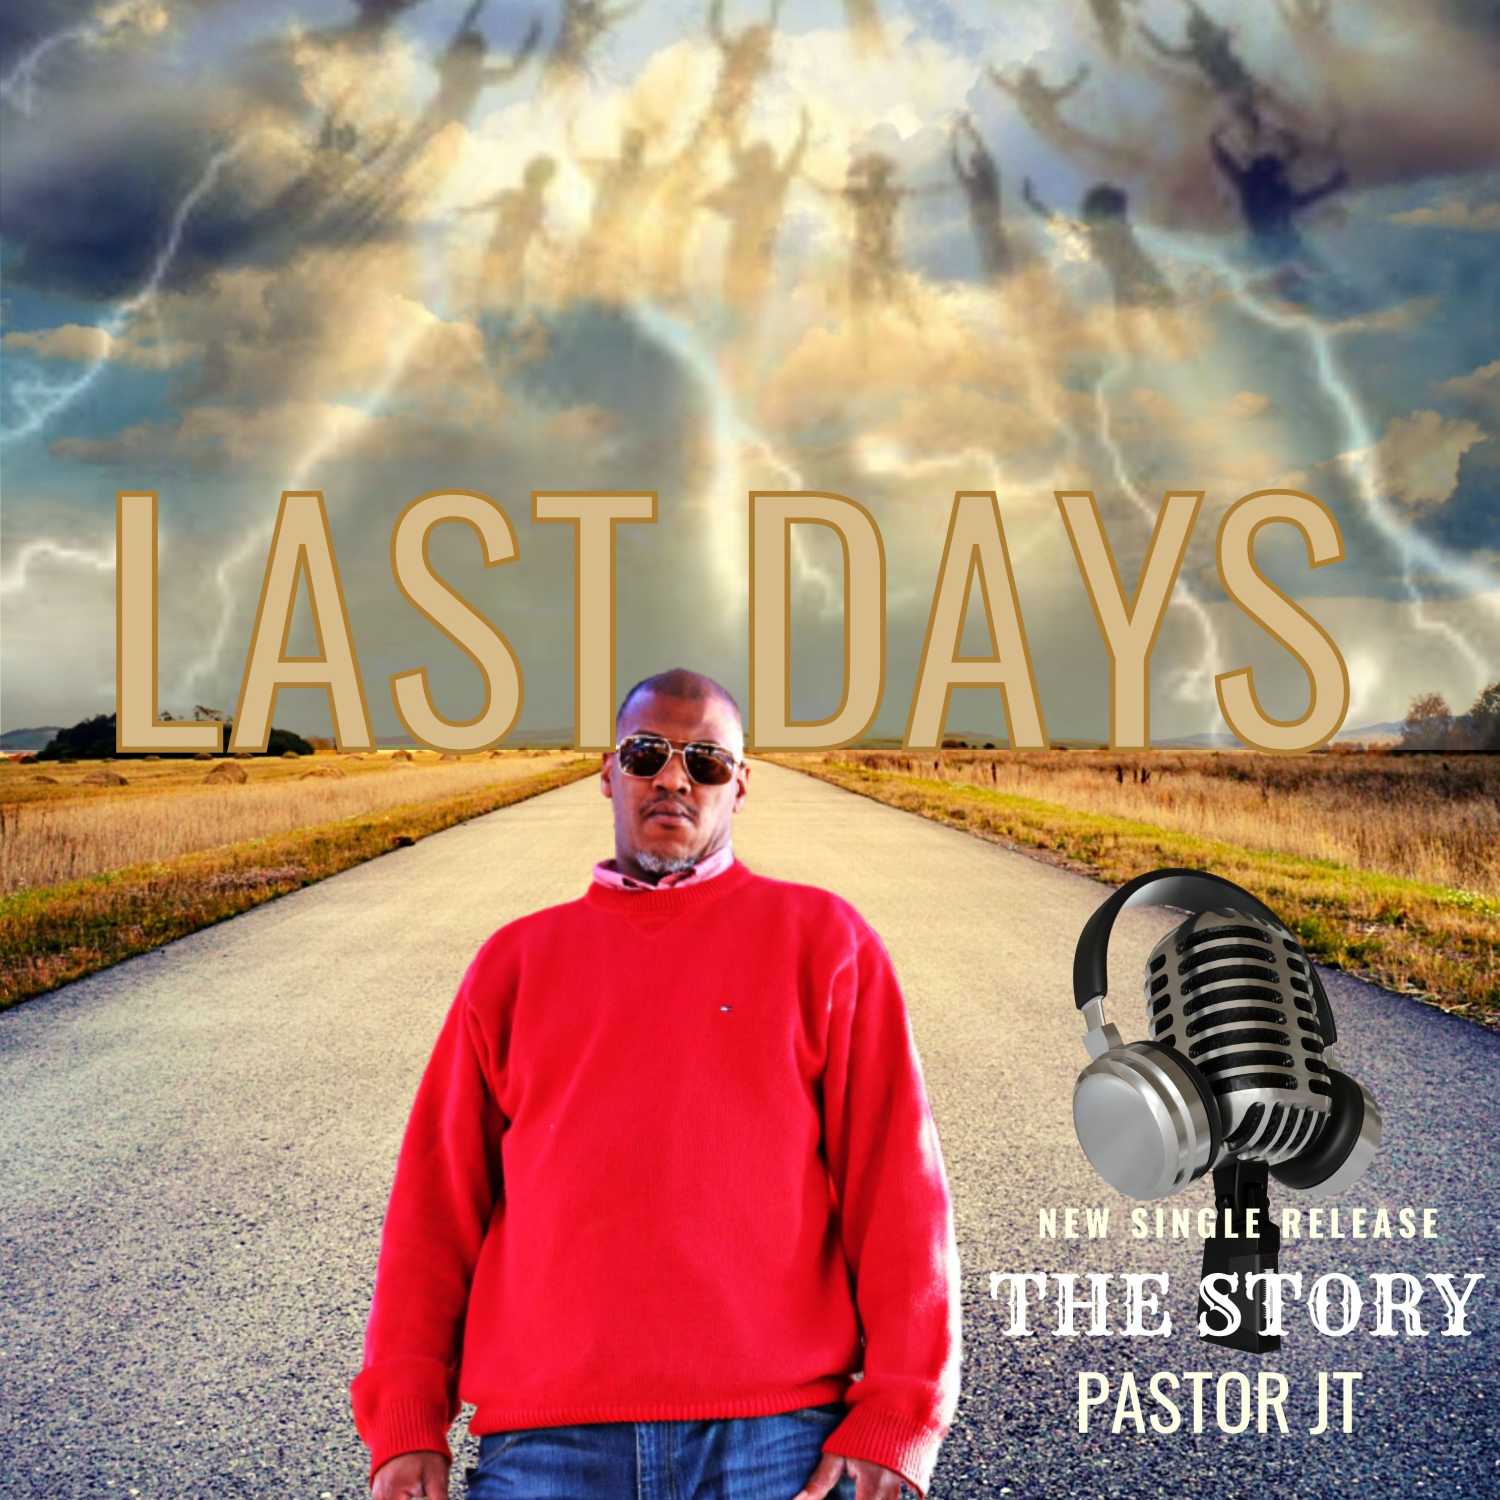 THE STORY BEHIND THE NEW SINGLE RELEASE LAST DAYS-PASTOR JT ES:28